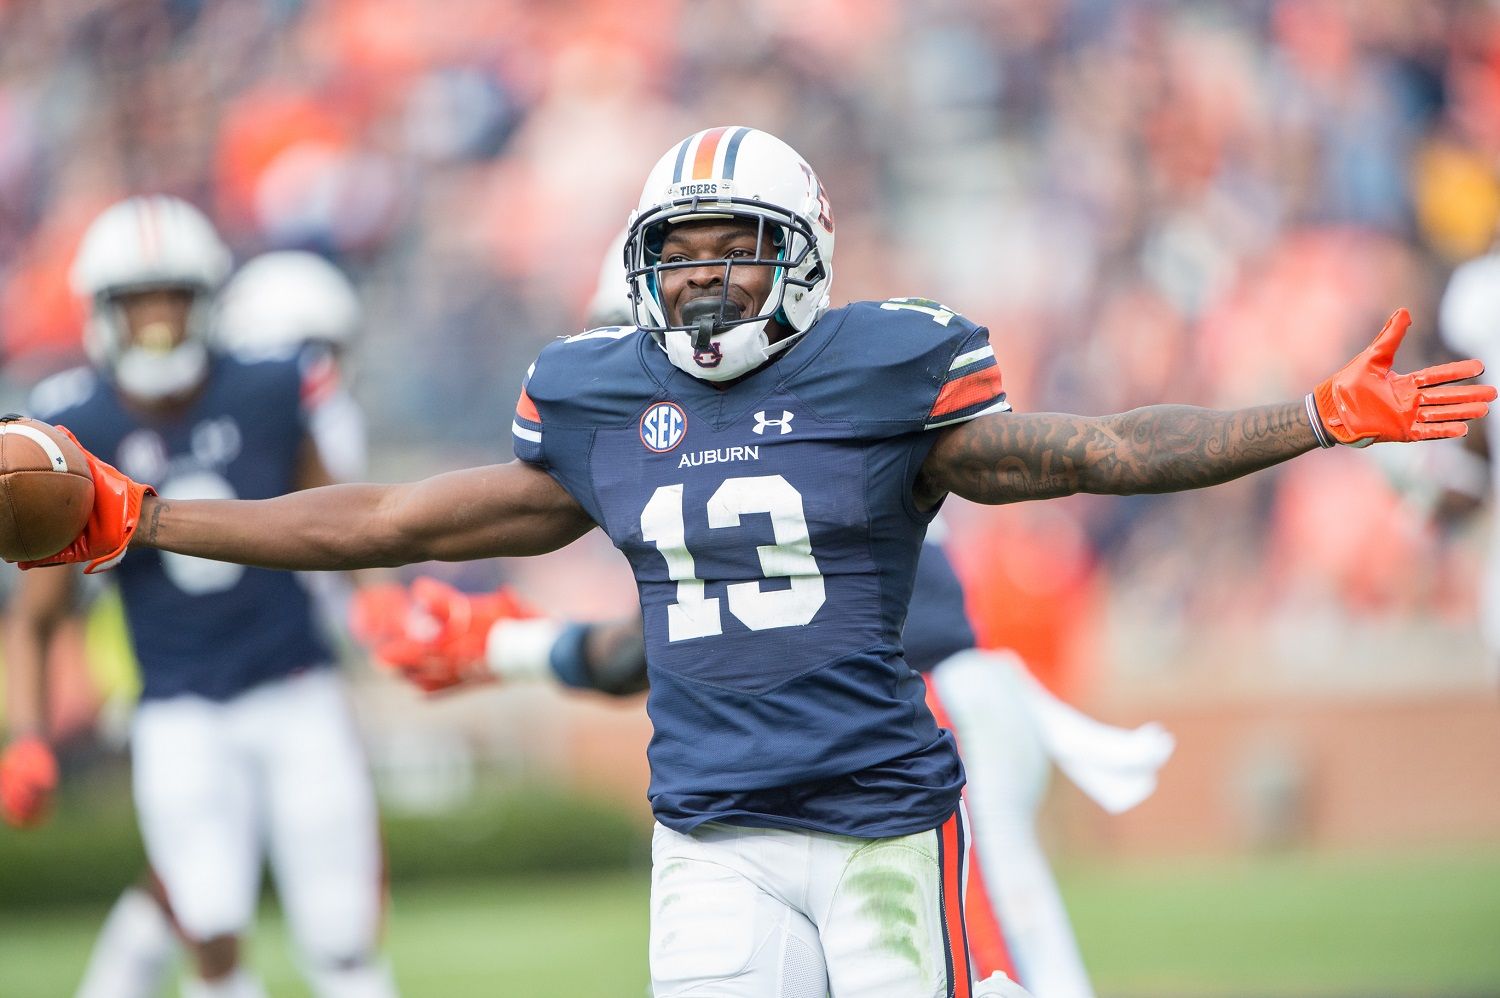 AUBURN, AL - NOVEMBER 18: Defensive back Javaris Davis #13 of the Auburn Tigers celebrates after a big play during their game against the Louisiana Monroe Warhawks at Jordan-Hare Stadium on November 18, 2017 in Auburn, Alabama. (Photo by Michael Chang/Getty Images)